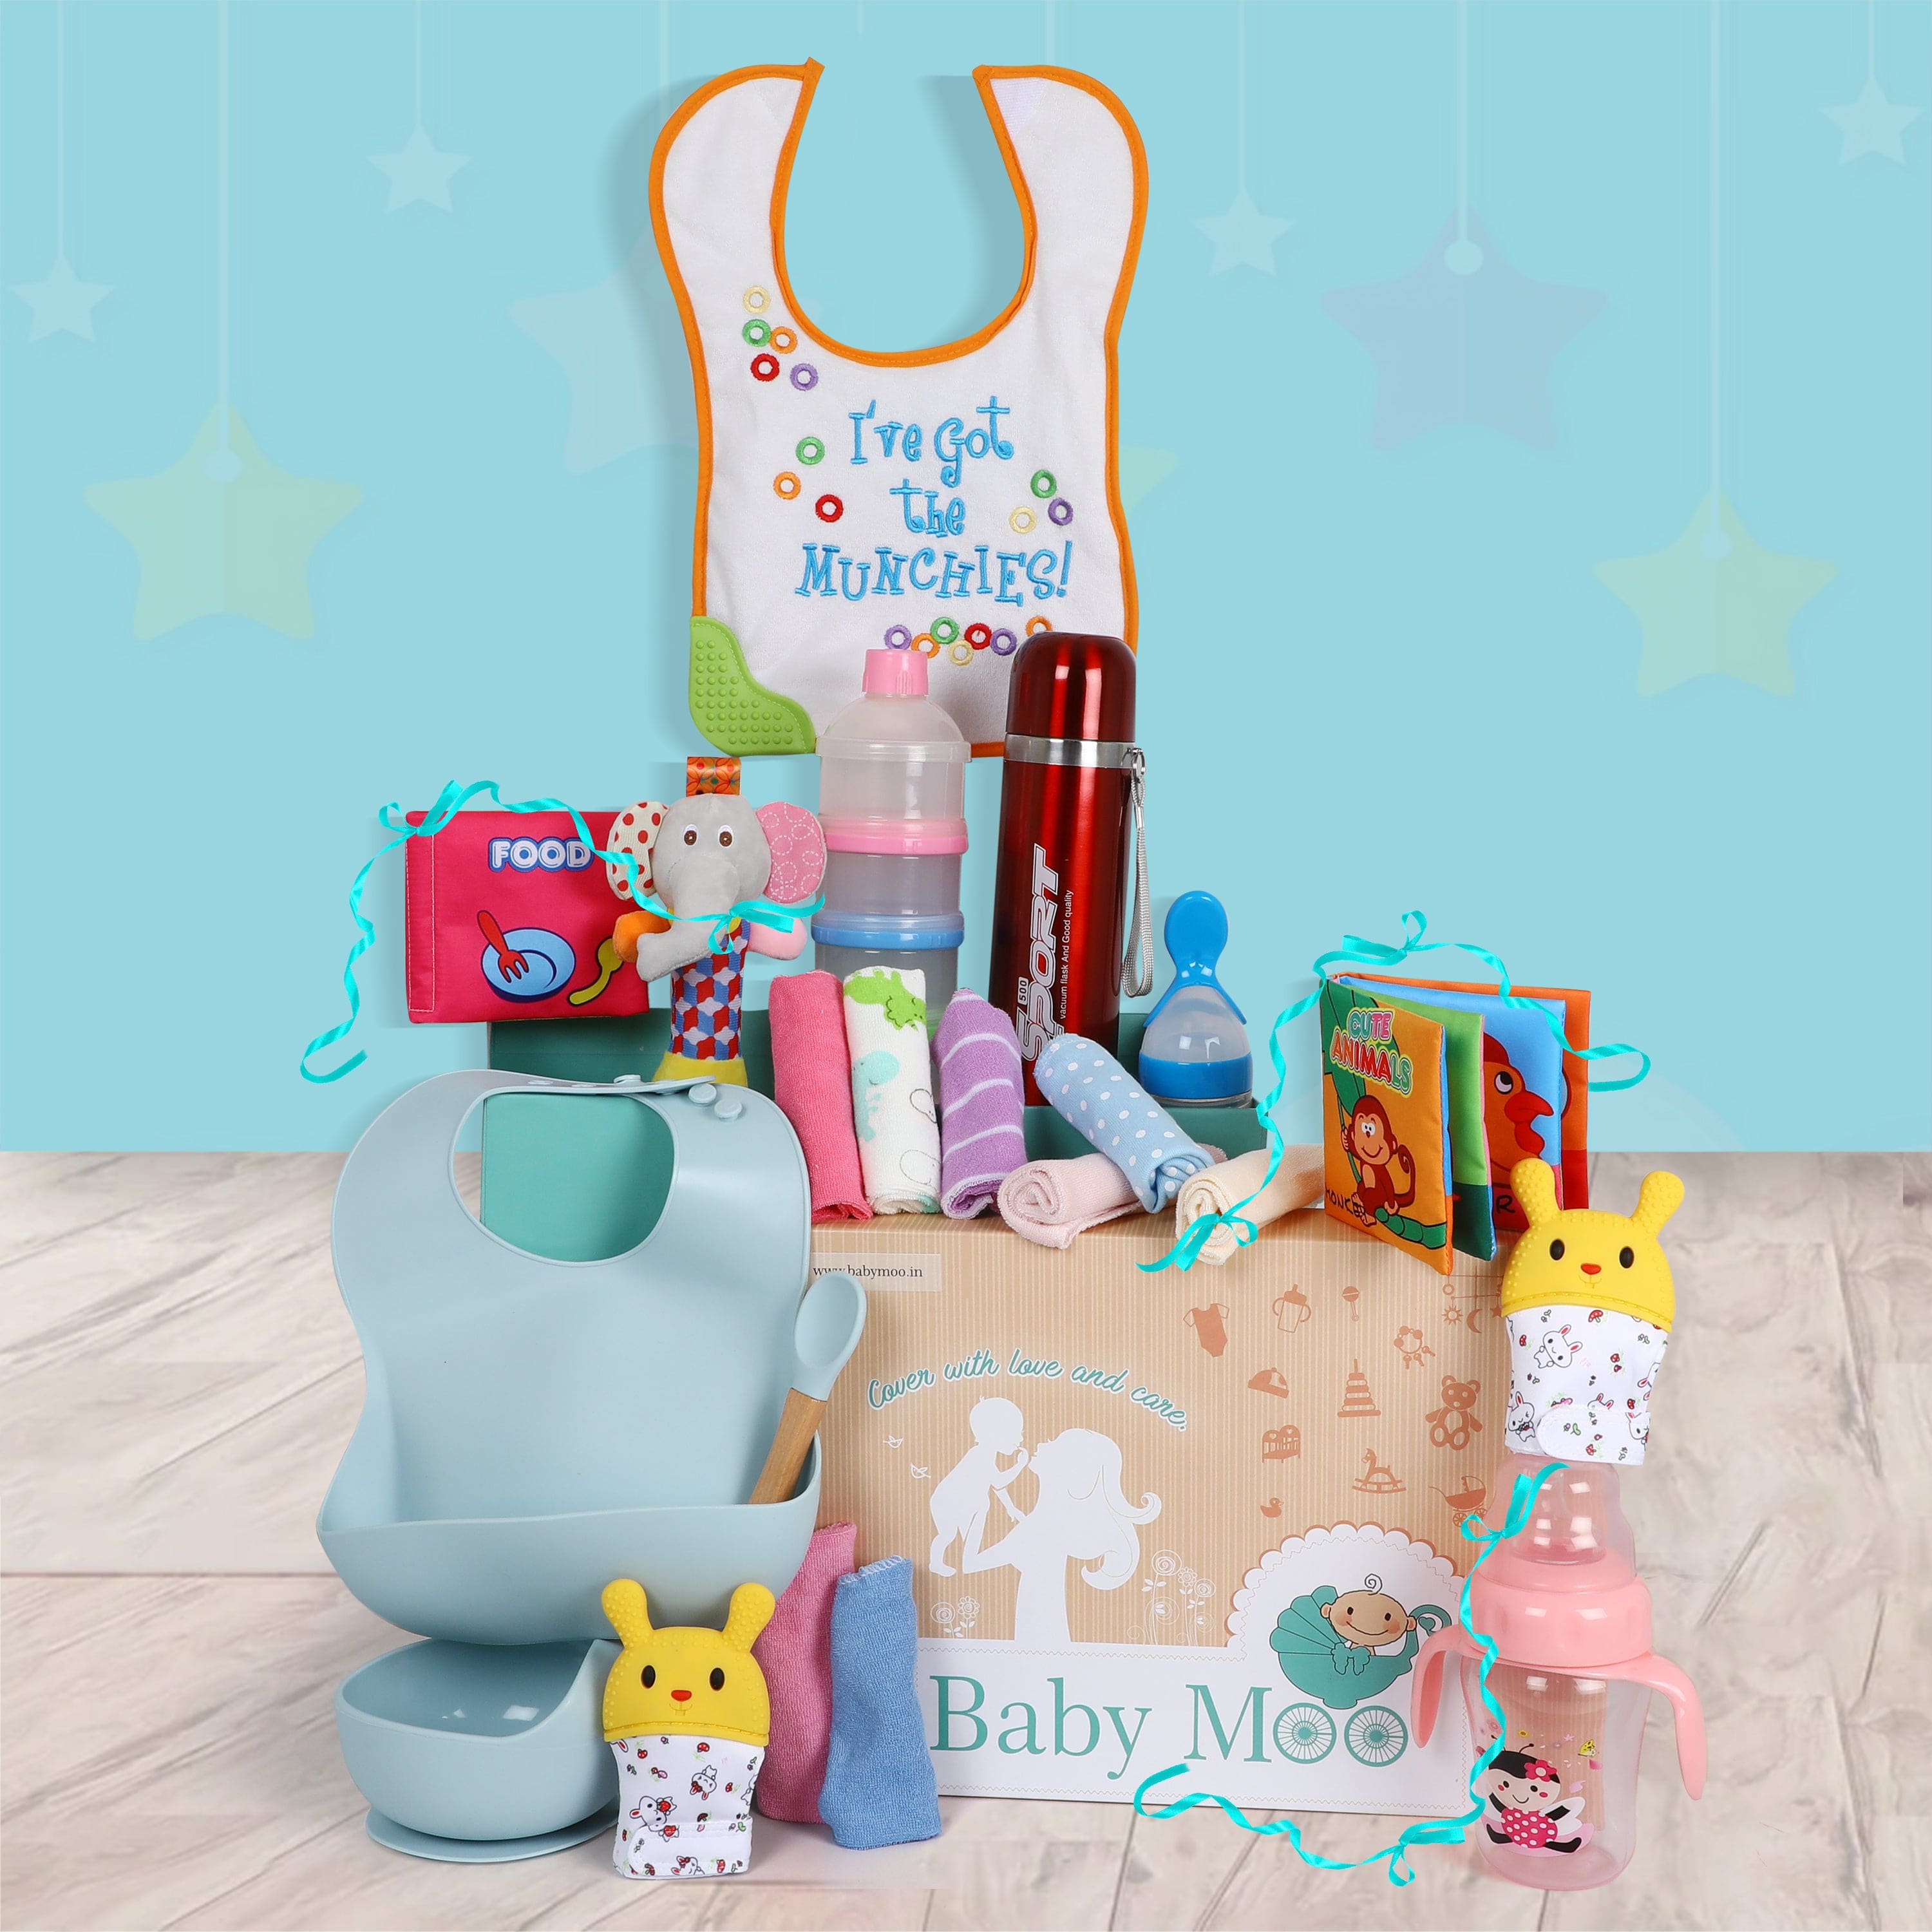 baby shower return gifts india online Archives - Gift giving is a true art